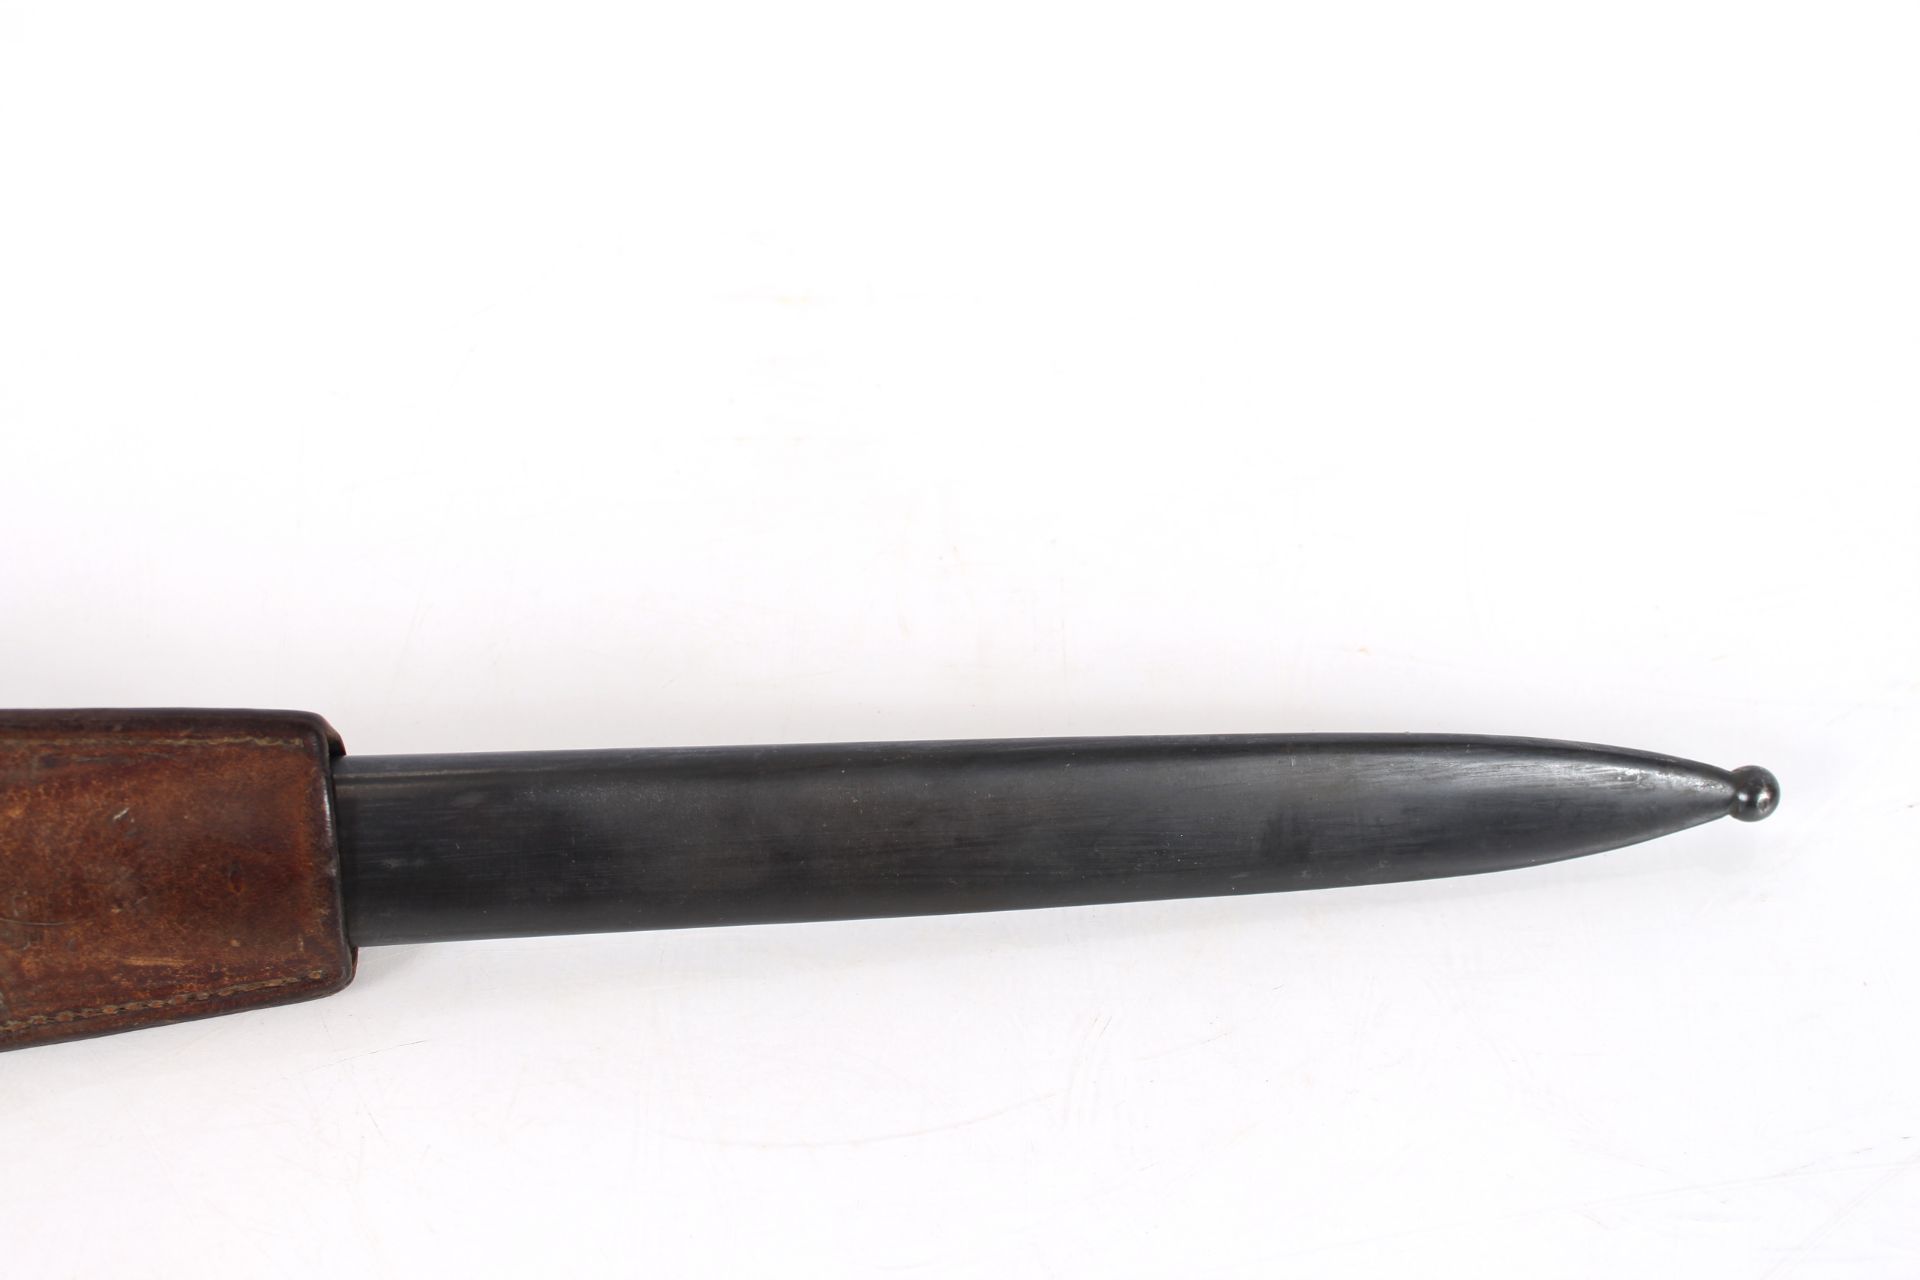 A Swiss model 1889 bayonet (Scmidt-Rubin) with sca - Image 11 of 11